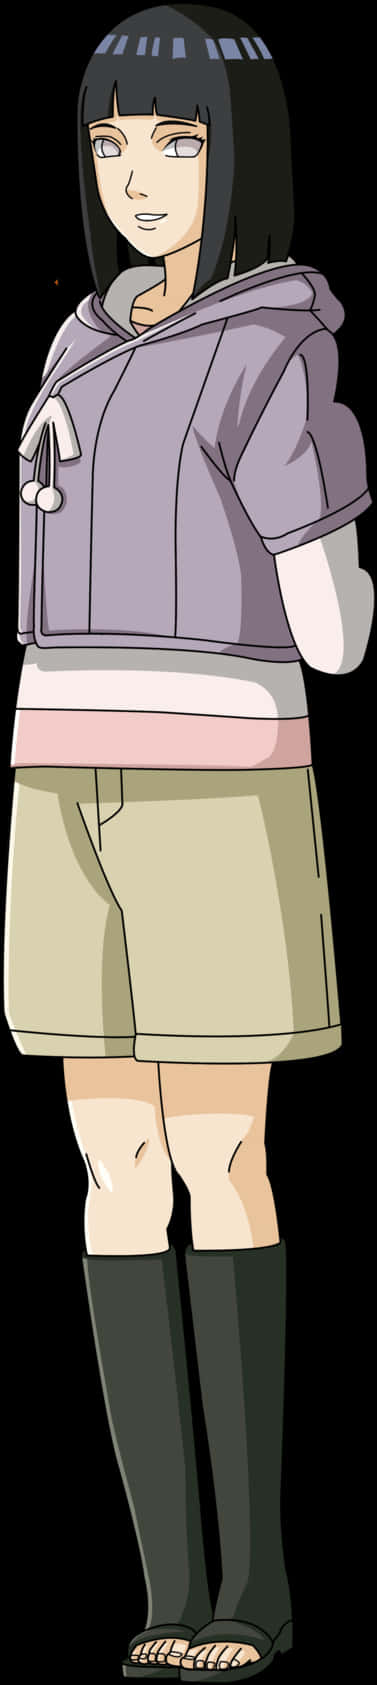 A Cartoon Of A Person's Shorts